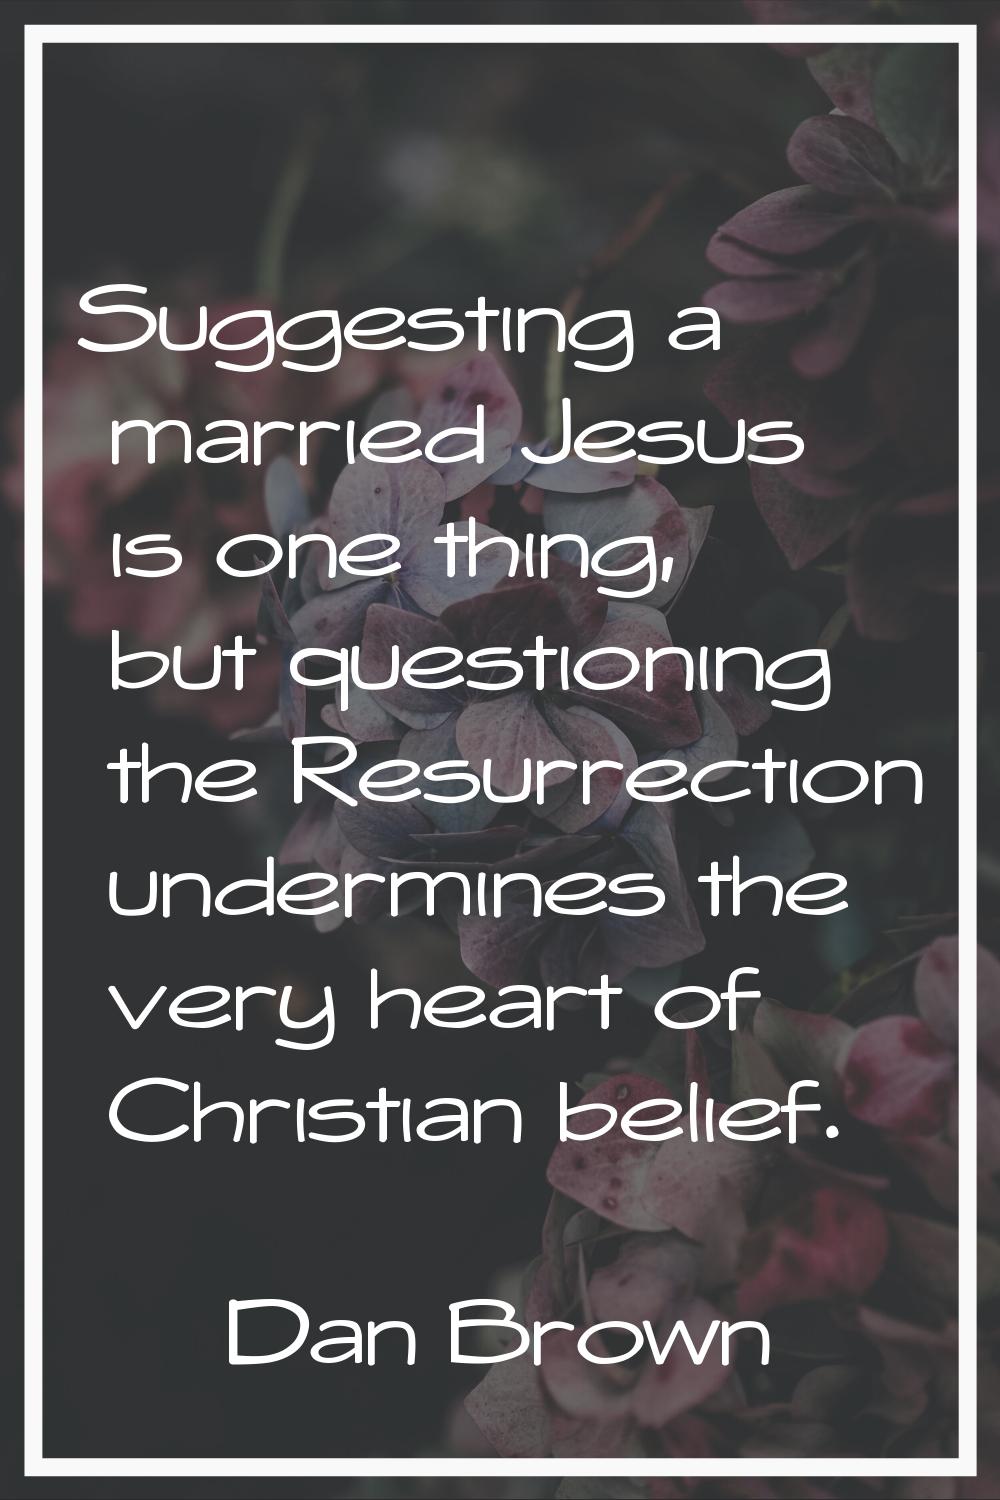 Suggesting a married Jesus is one thing, but questioning the Resurrection undermines the very heart